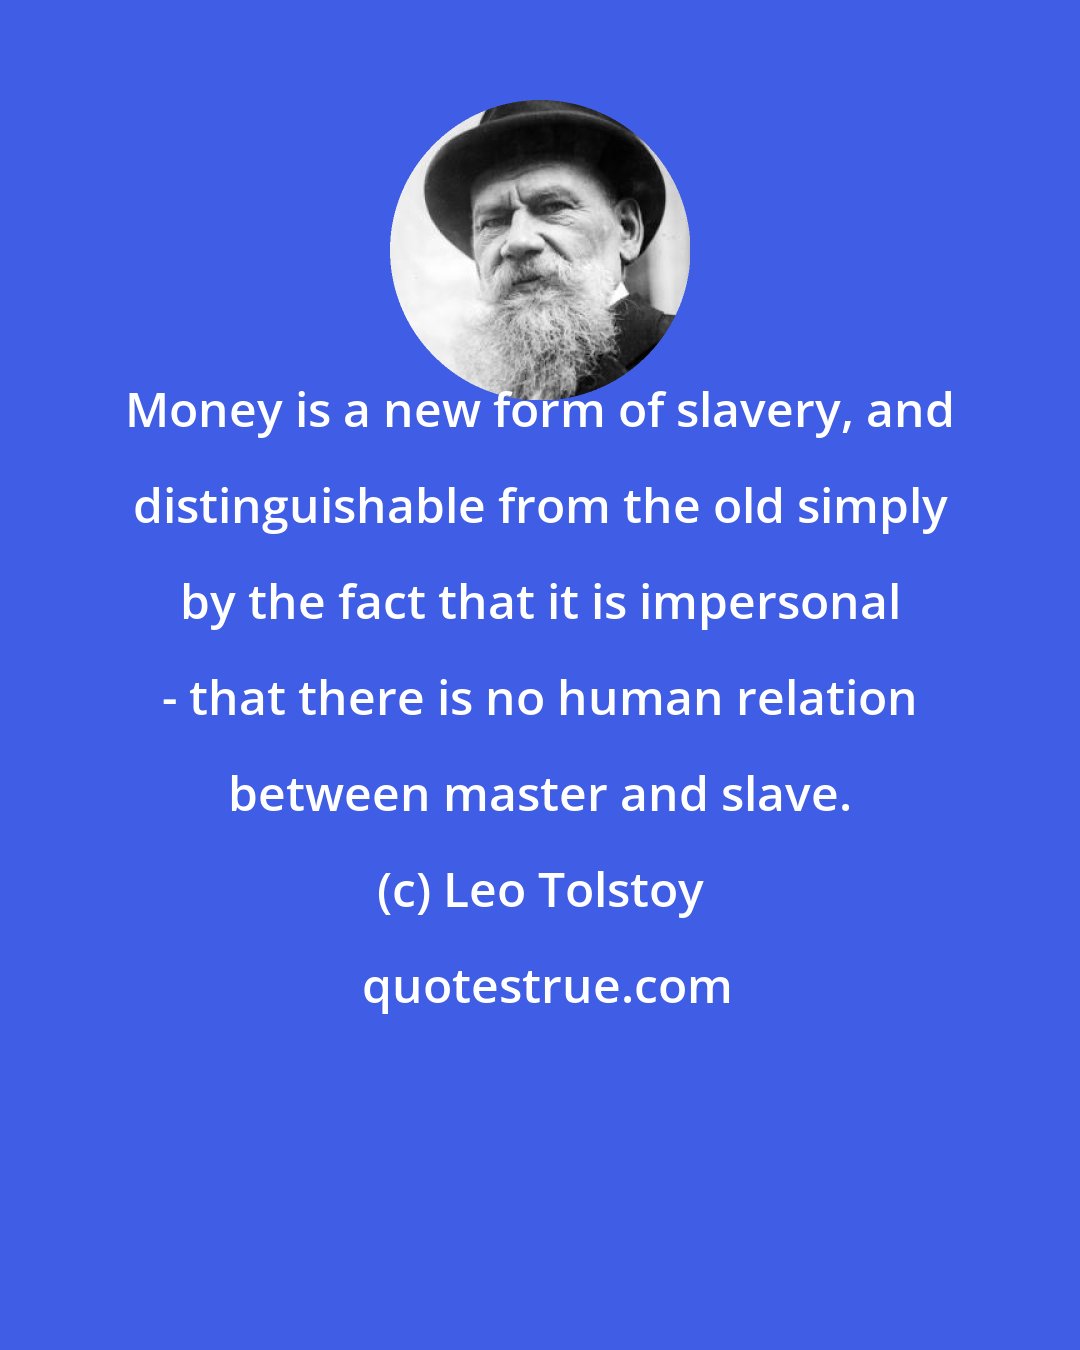 Leo Tolstoy: Money is a new form of slavery, and distinguishable from the old simply by the fact that it is impersonal - that there is no human relation between master and slave.